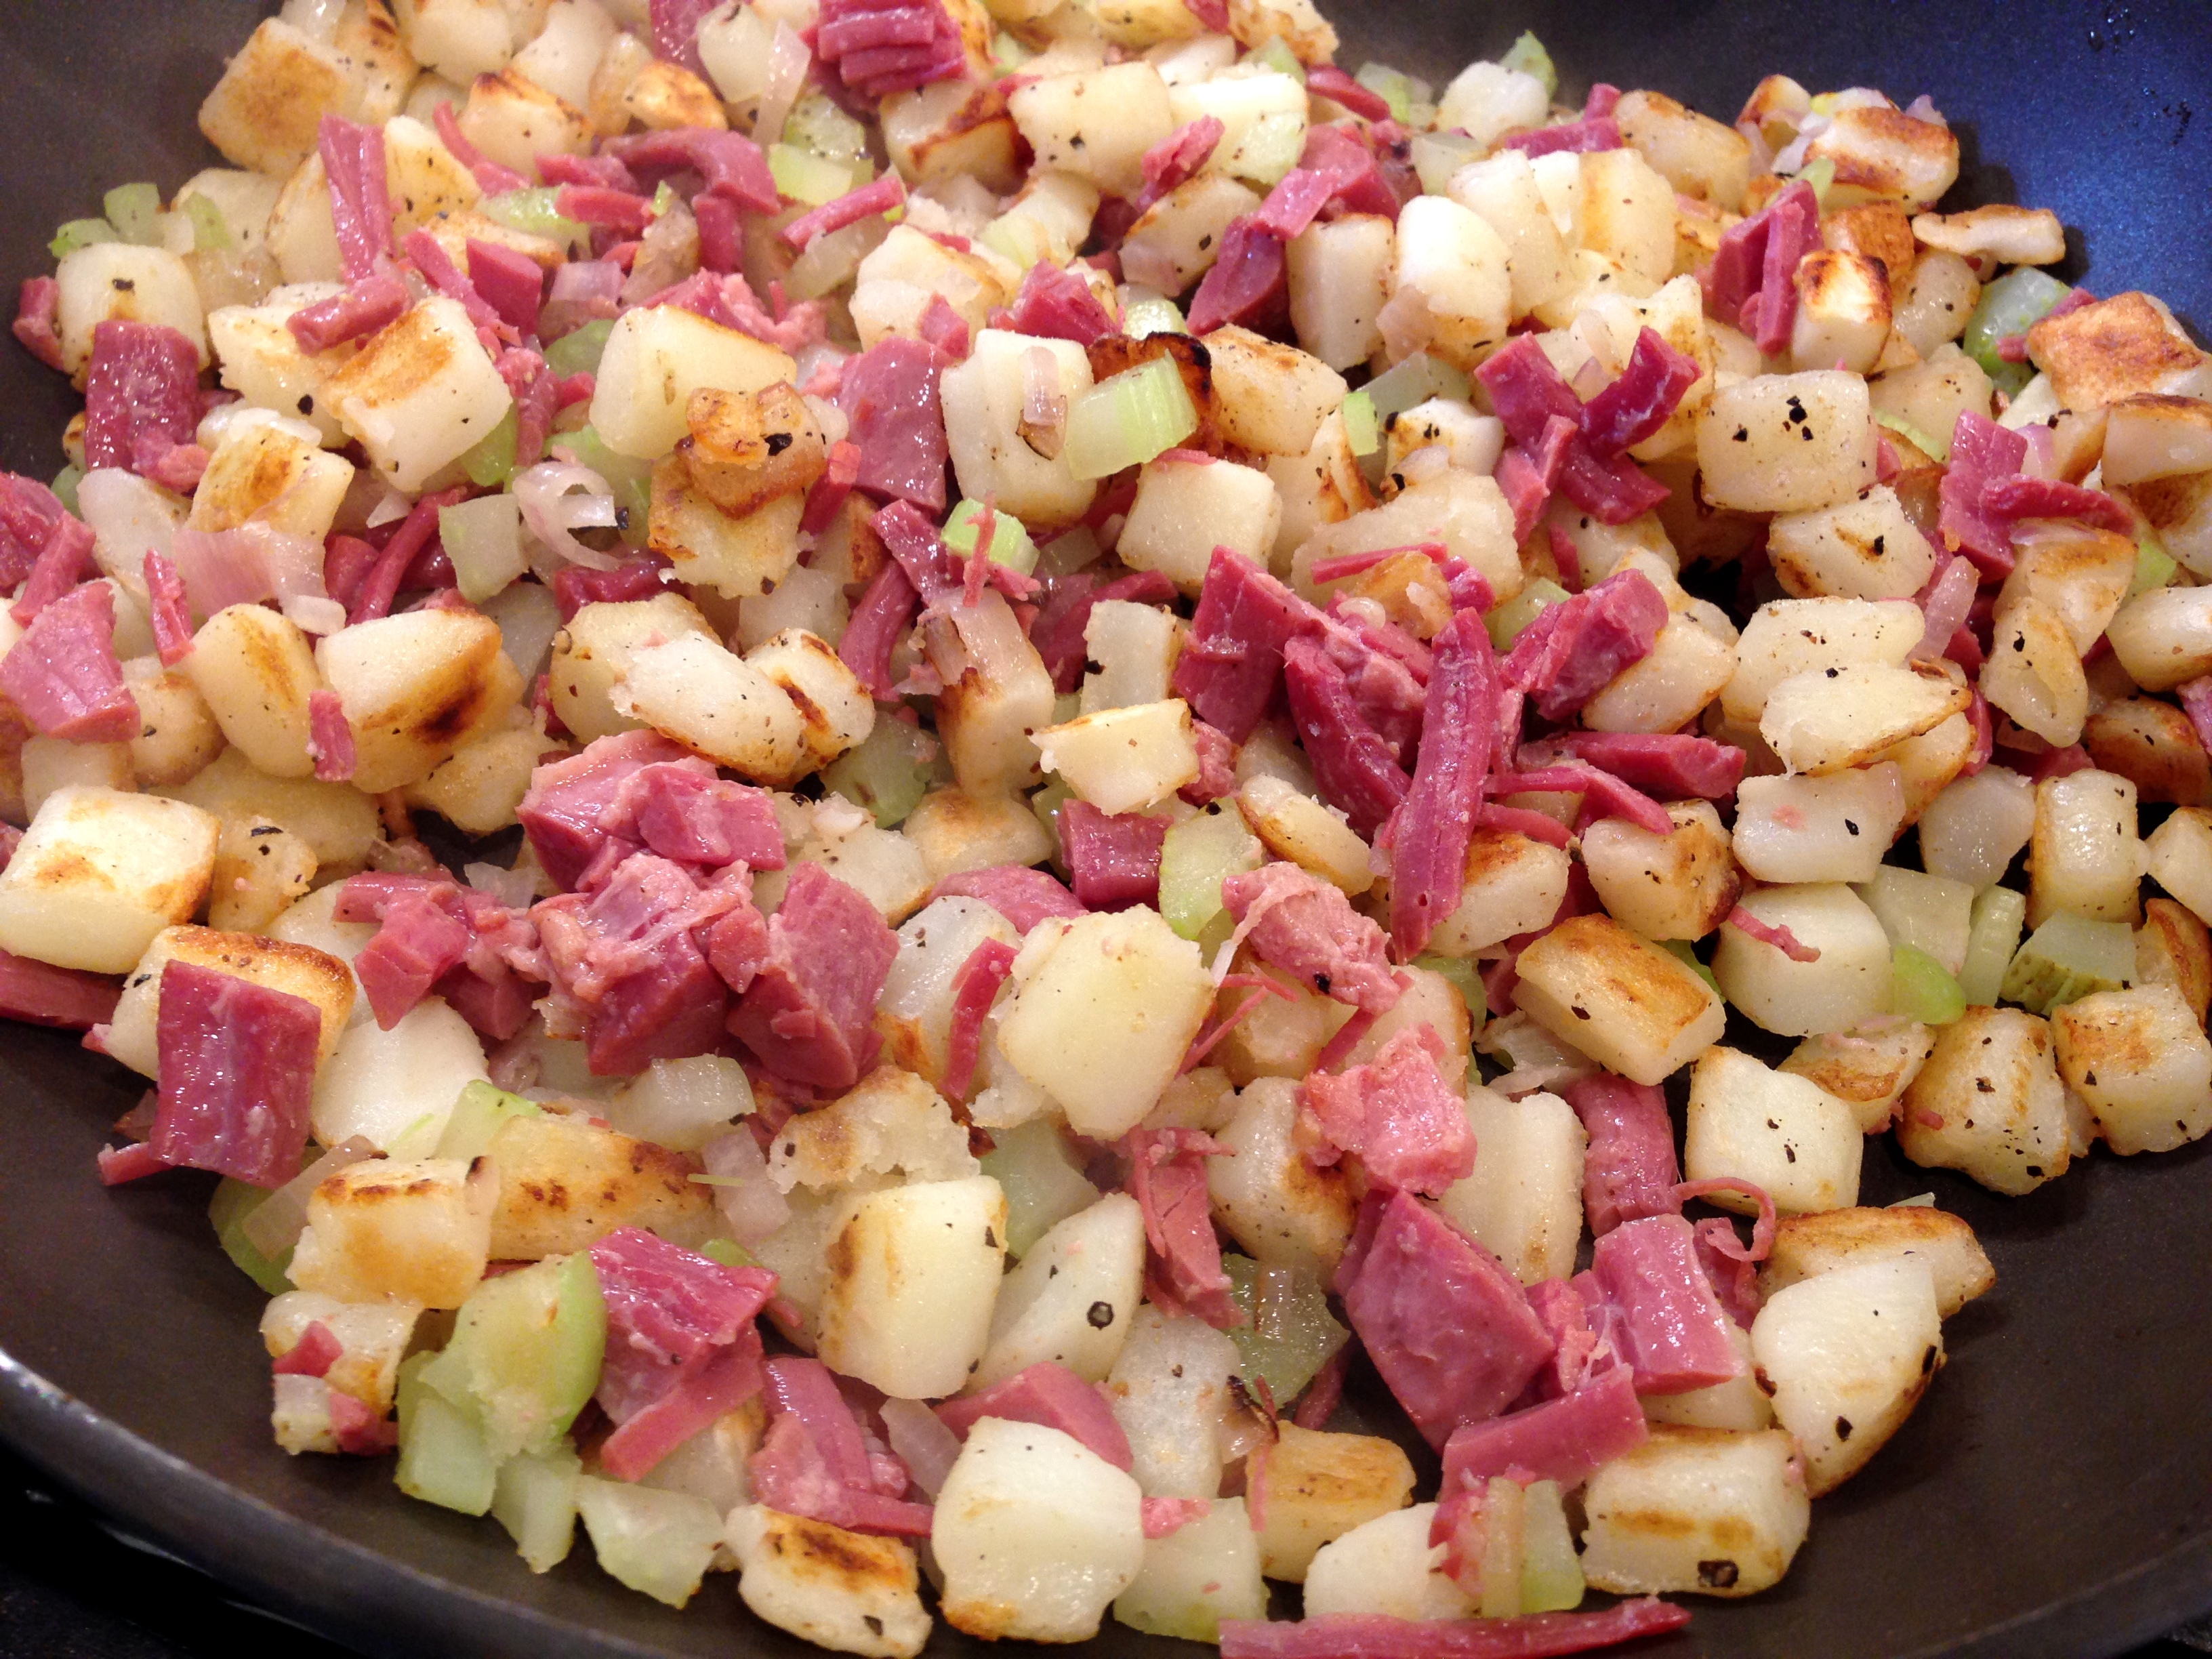 Add corned beef to pan